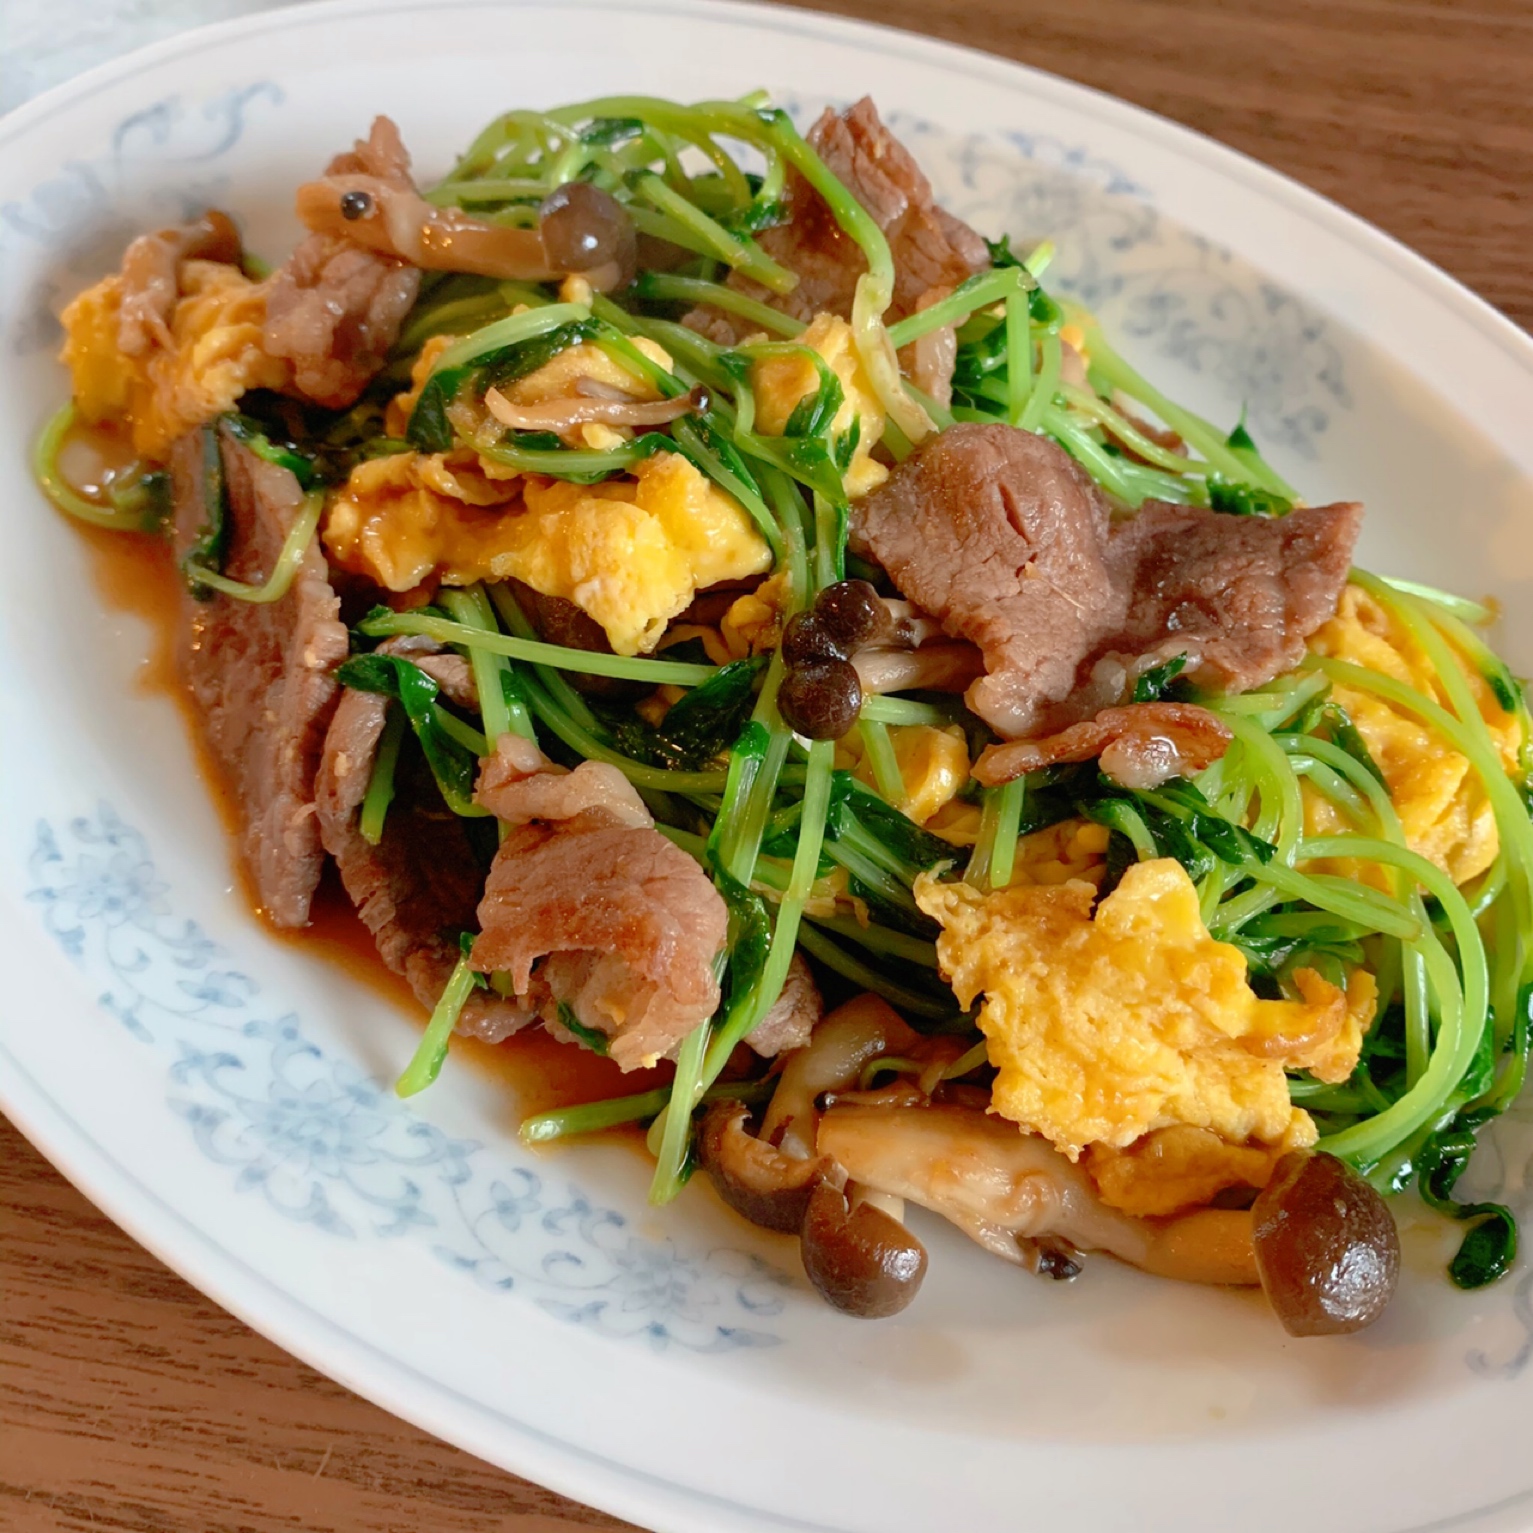 Stir-fried beef and pea sprouts and seasoned with oyster sauce.